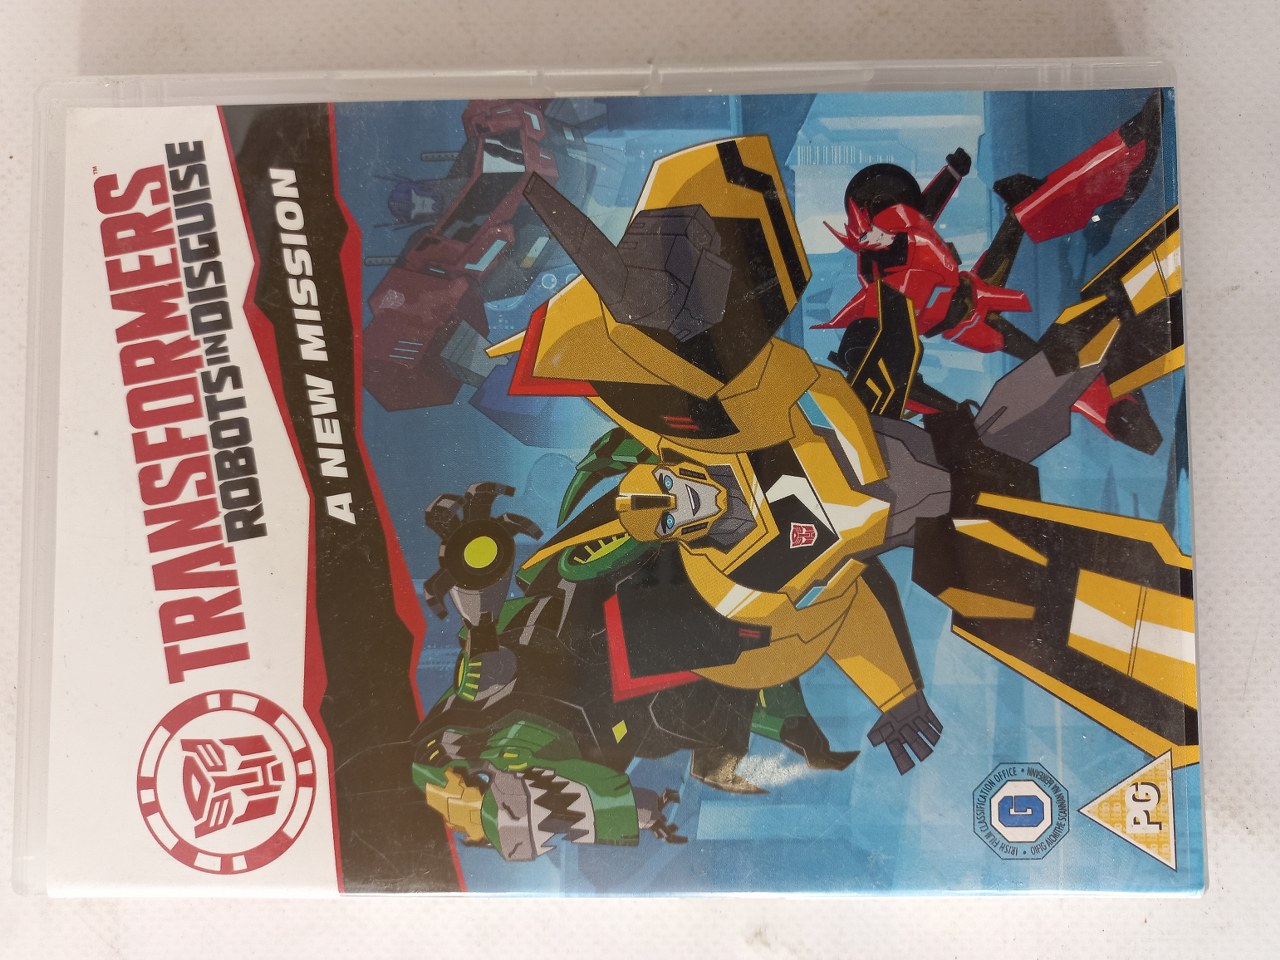 5060400282807 Transformers Robots In Disguise A Mission DVD ENGLISH 2016